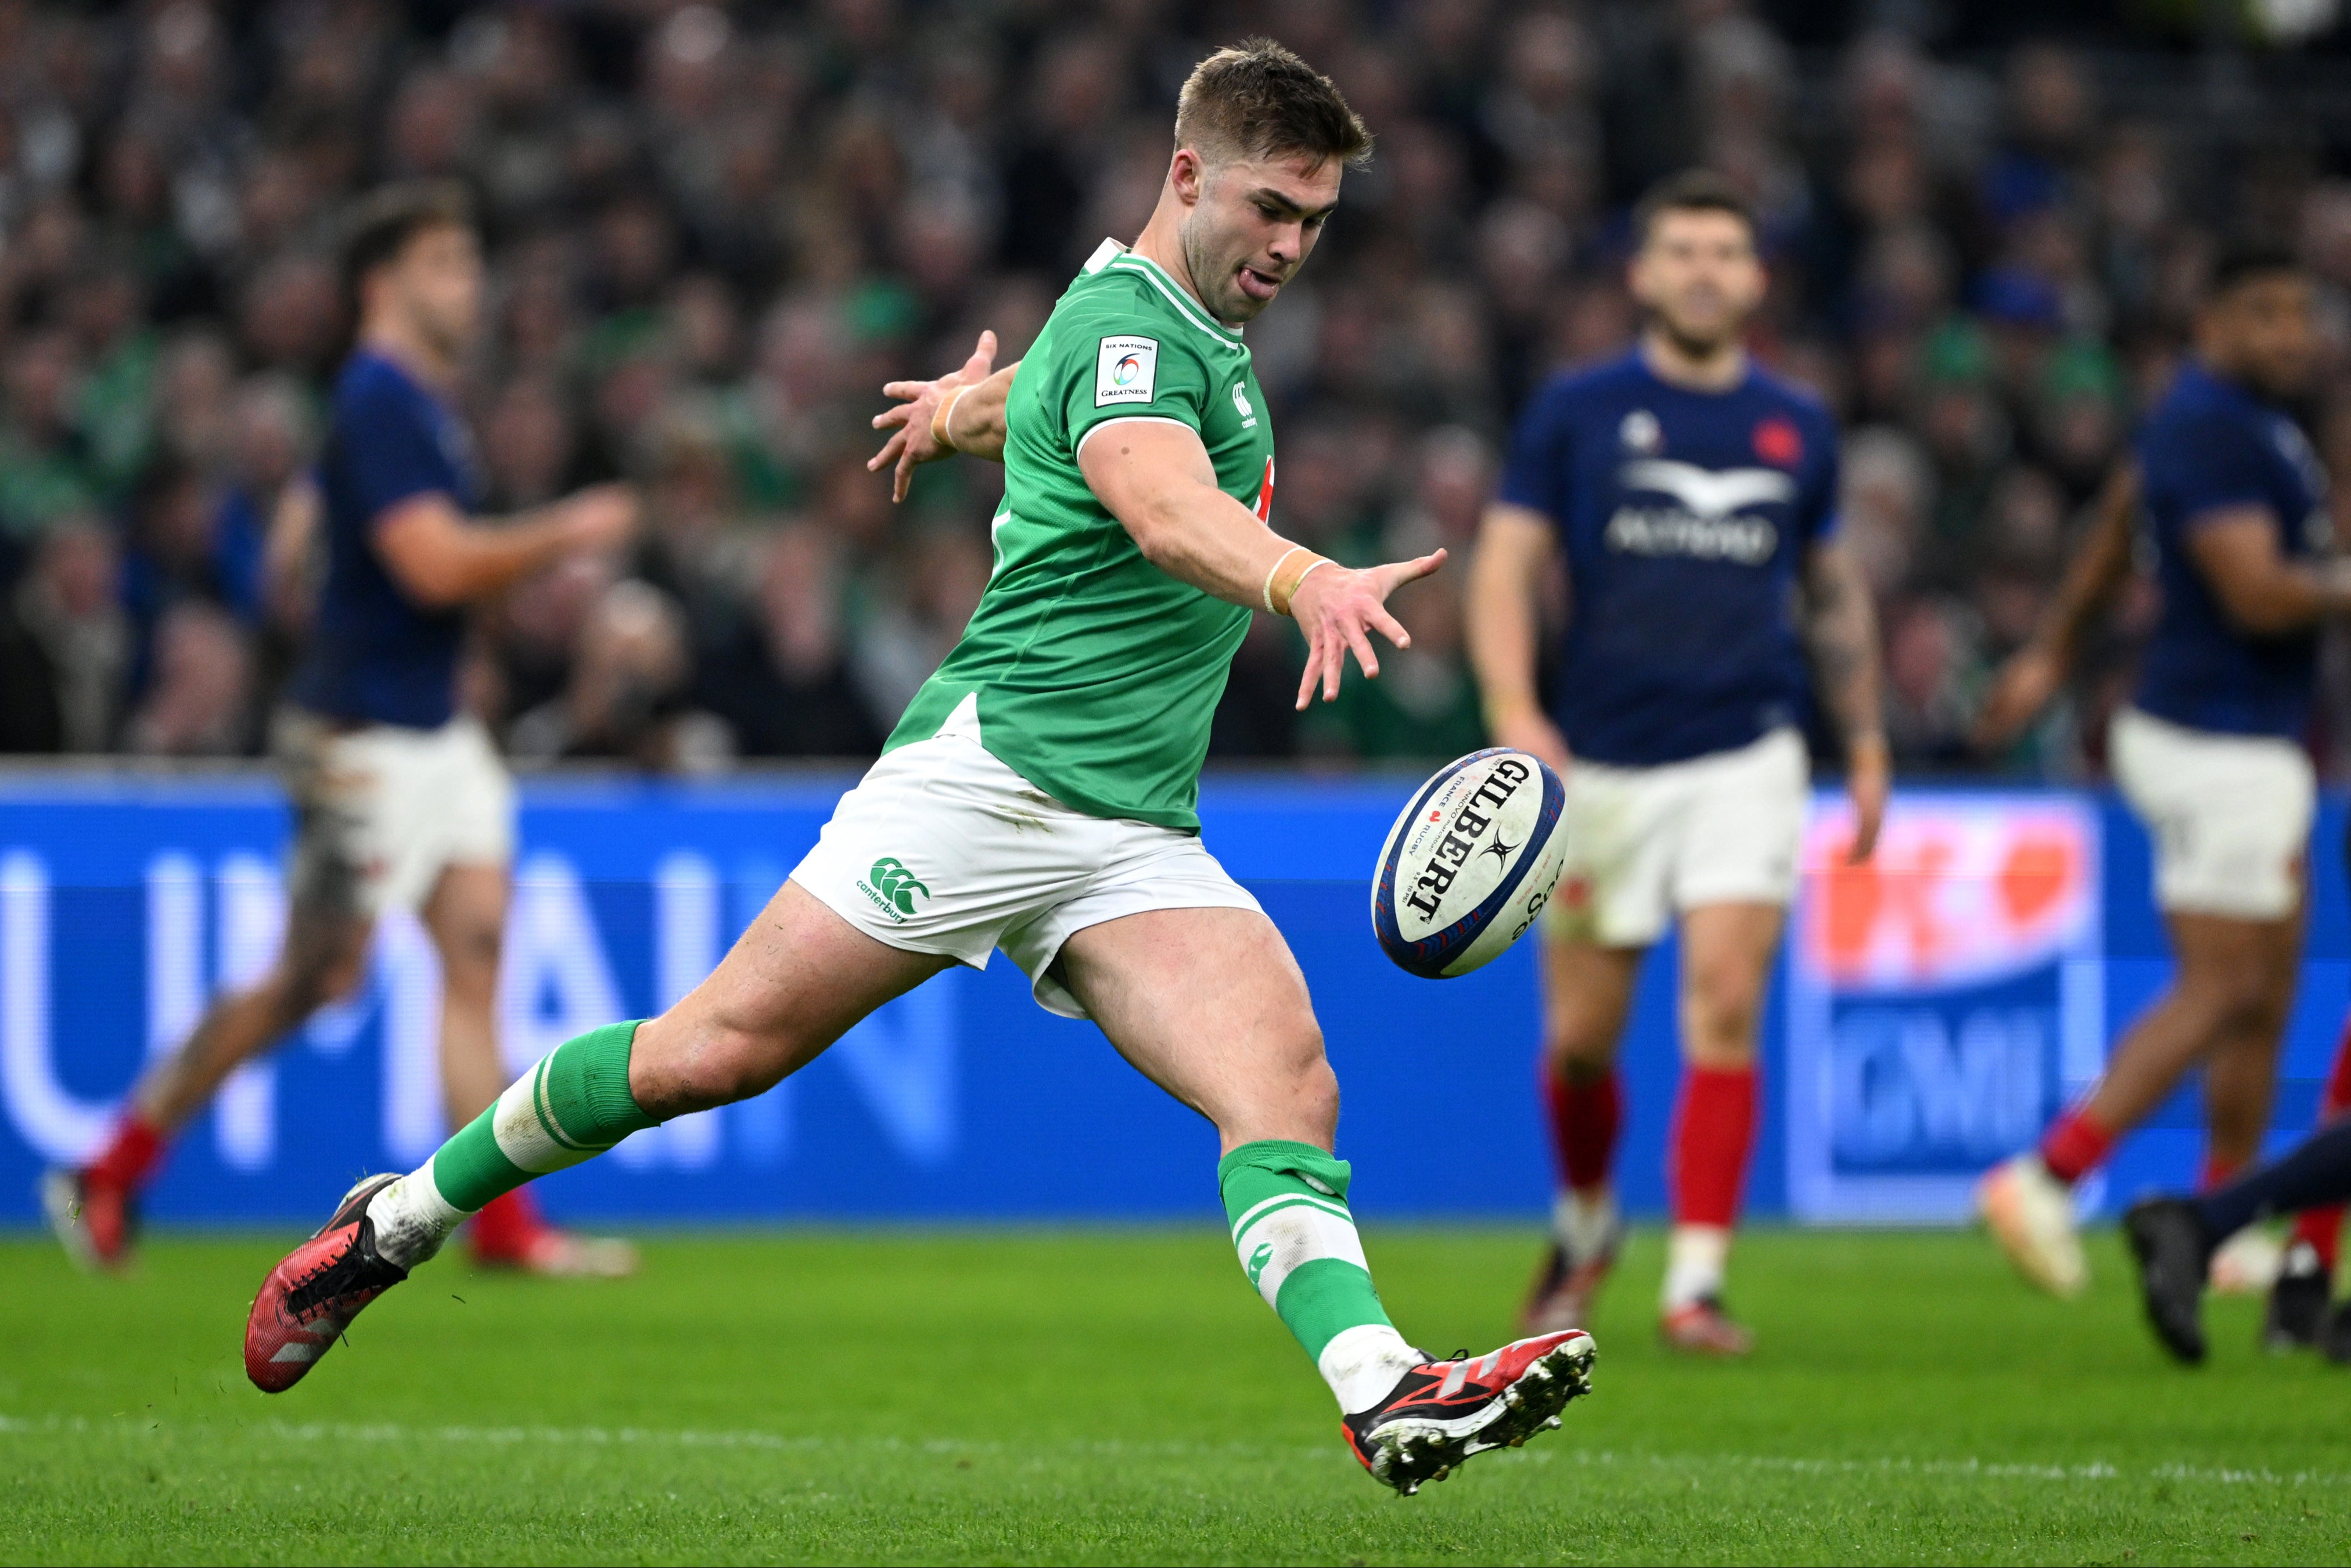 Filling a big pair of boots: Jack Crowley was excellent for Ireland